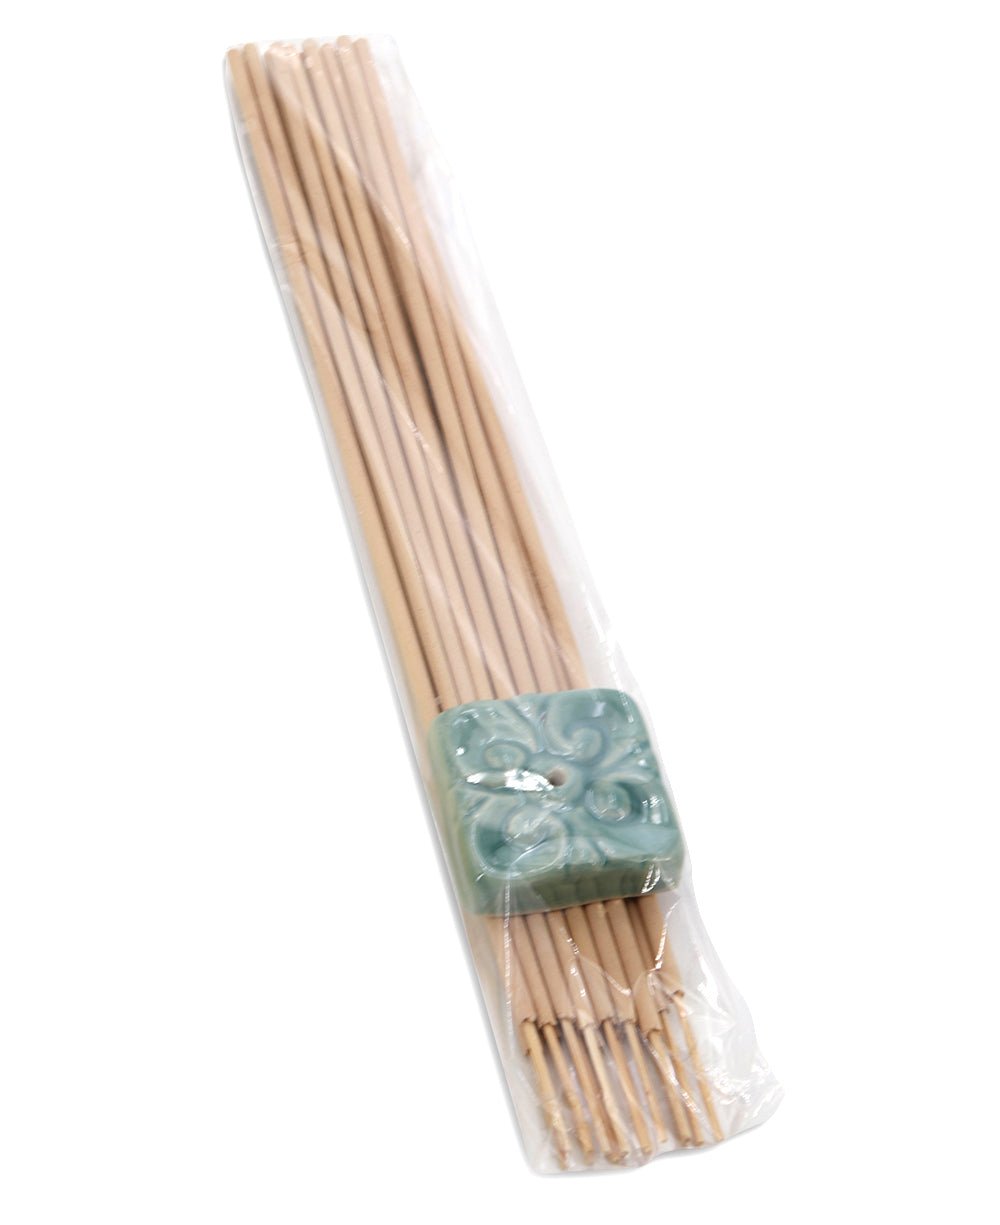 Balinese Flower Champaka Essential Oil Stick Incense Pack - Incense